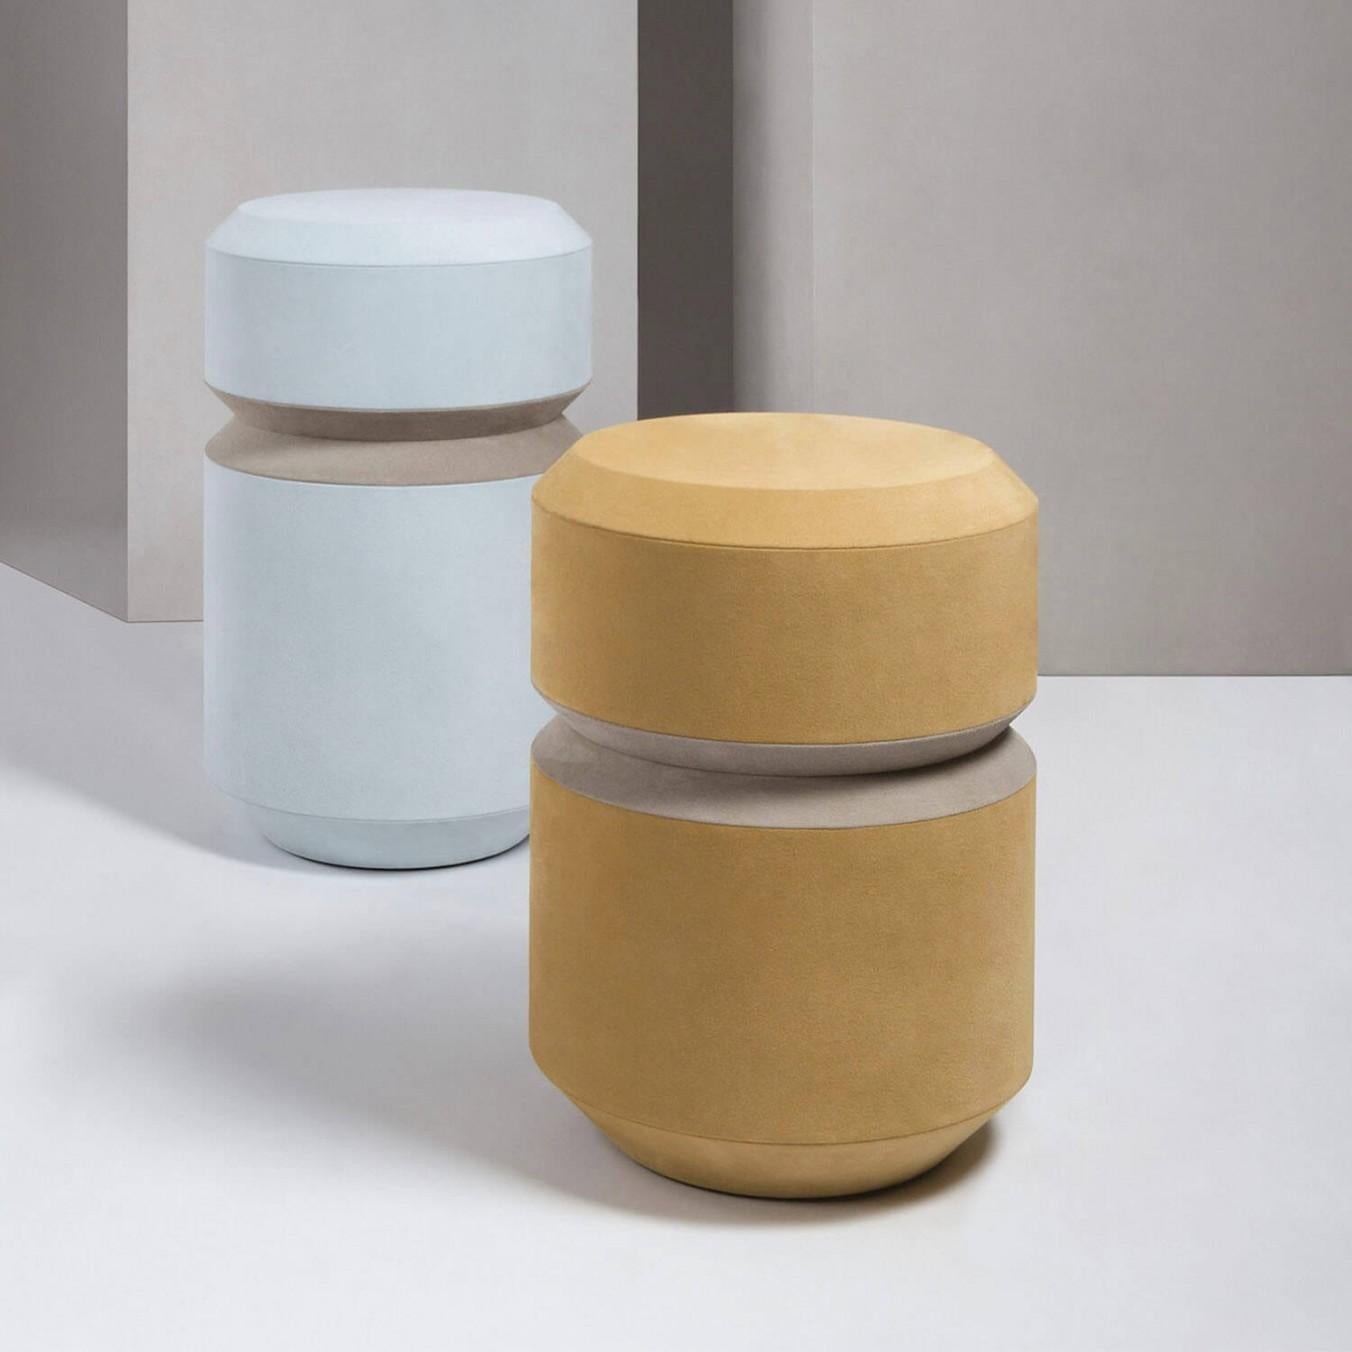 Contemporary round leather stool - Yoyo by Stephane Parmentier for Giobagnara.
The object presented in the image has following finish: A76 Mustard Suede Leather and A37 Light Grey Suede Leather.

Great for an office, kids room or any place in the